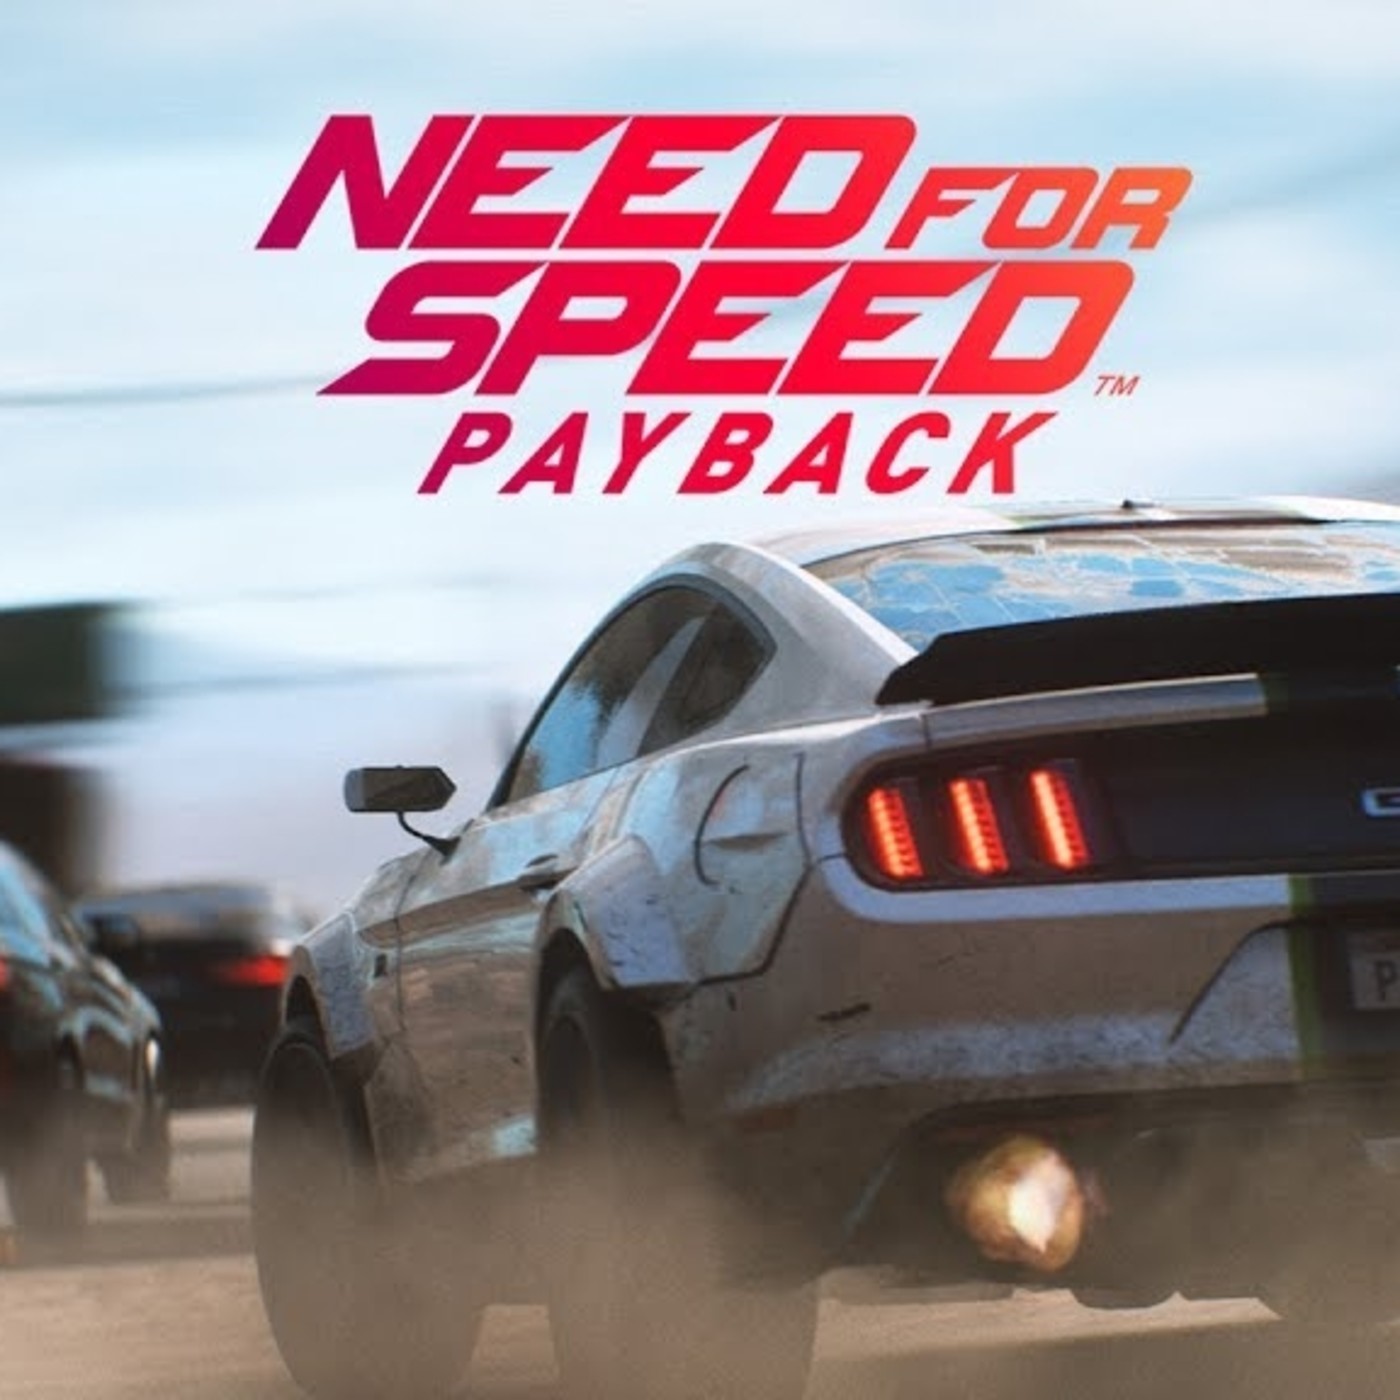 Need for Speed пейбек. Need for Speed Payback (ps4). Пэйбэк 3. NFS Payback ps5. Nfs payback ps4